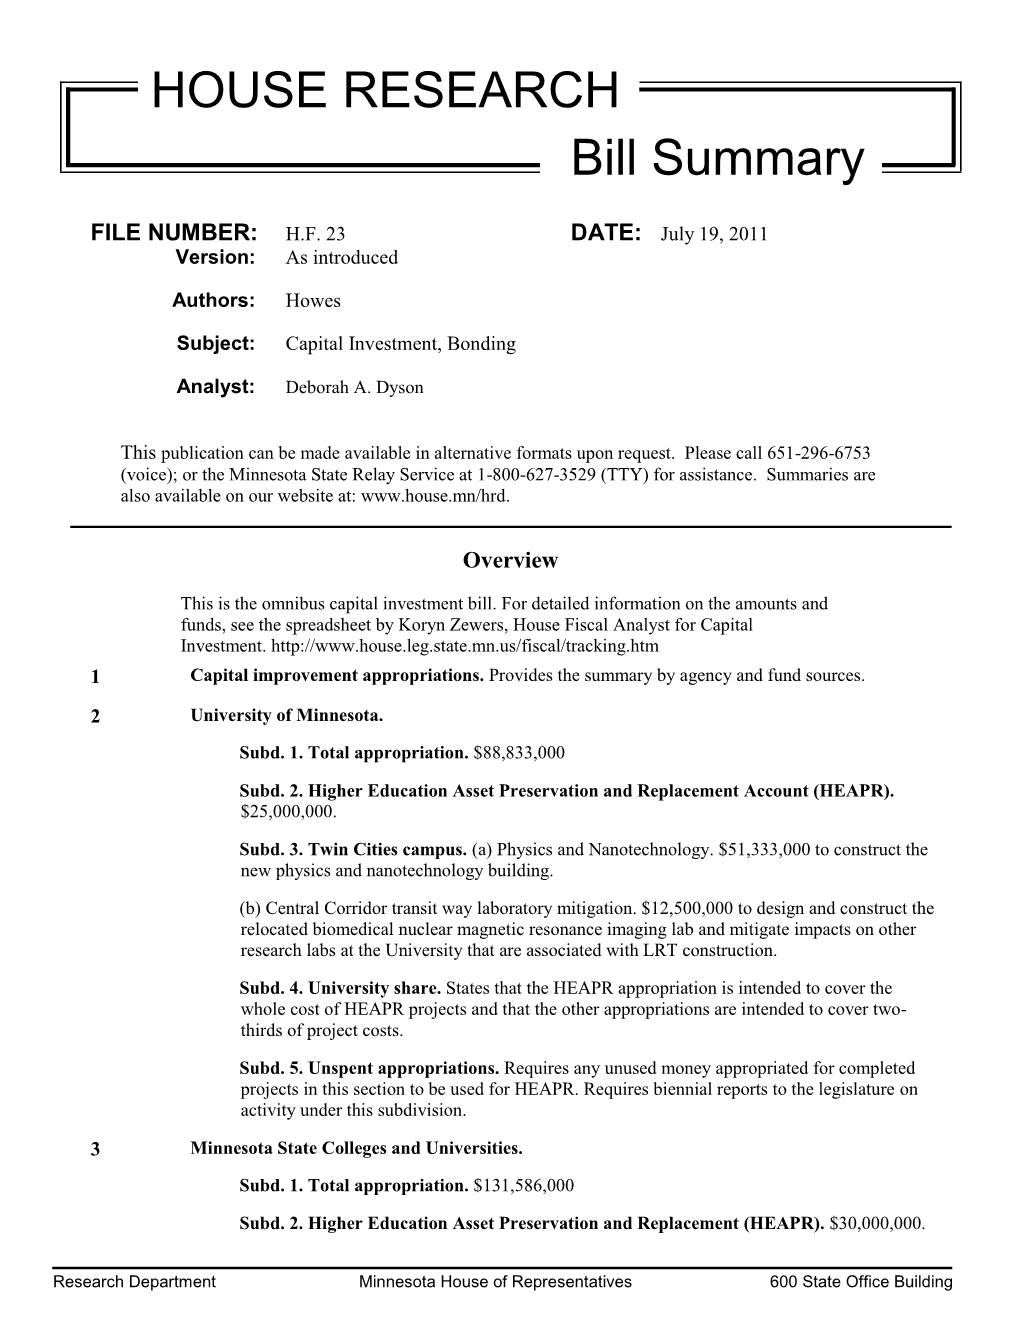 HOUSE RESEARCH Bill Summary